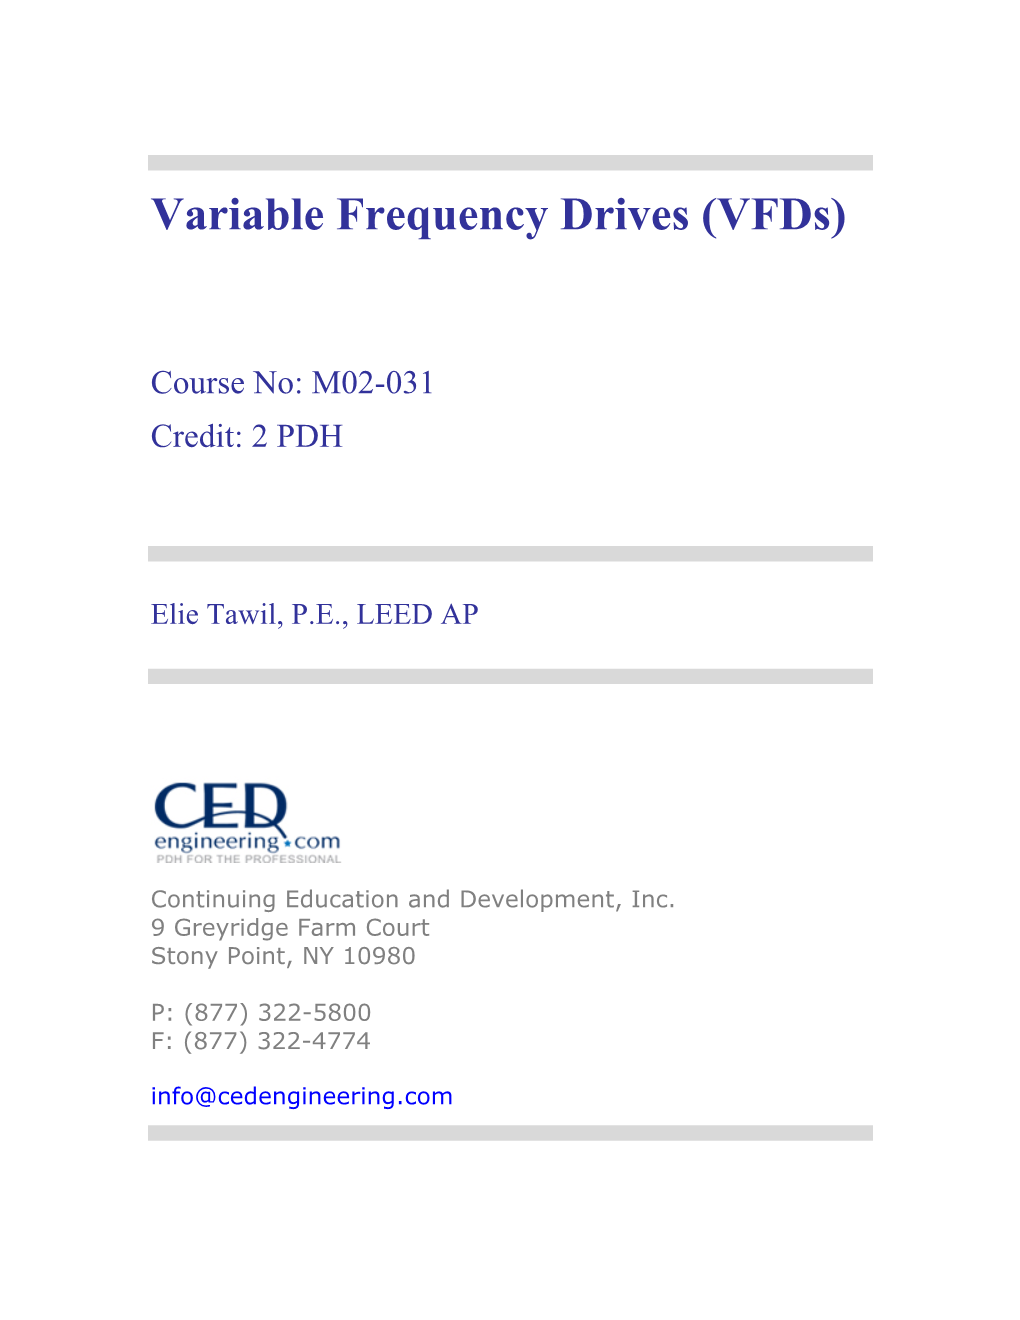 Variable Frequency Drives (Vfds)